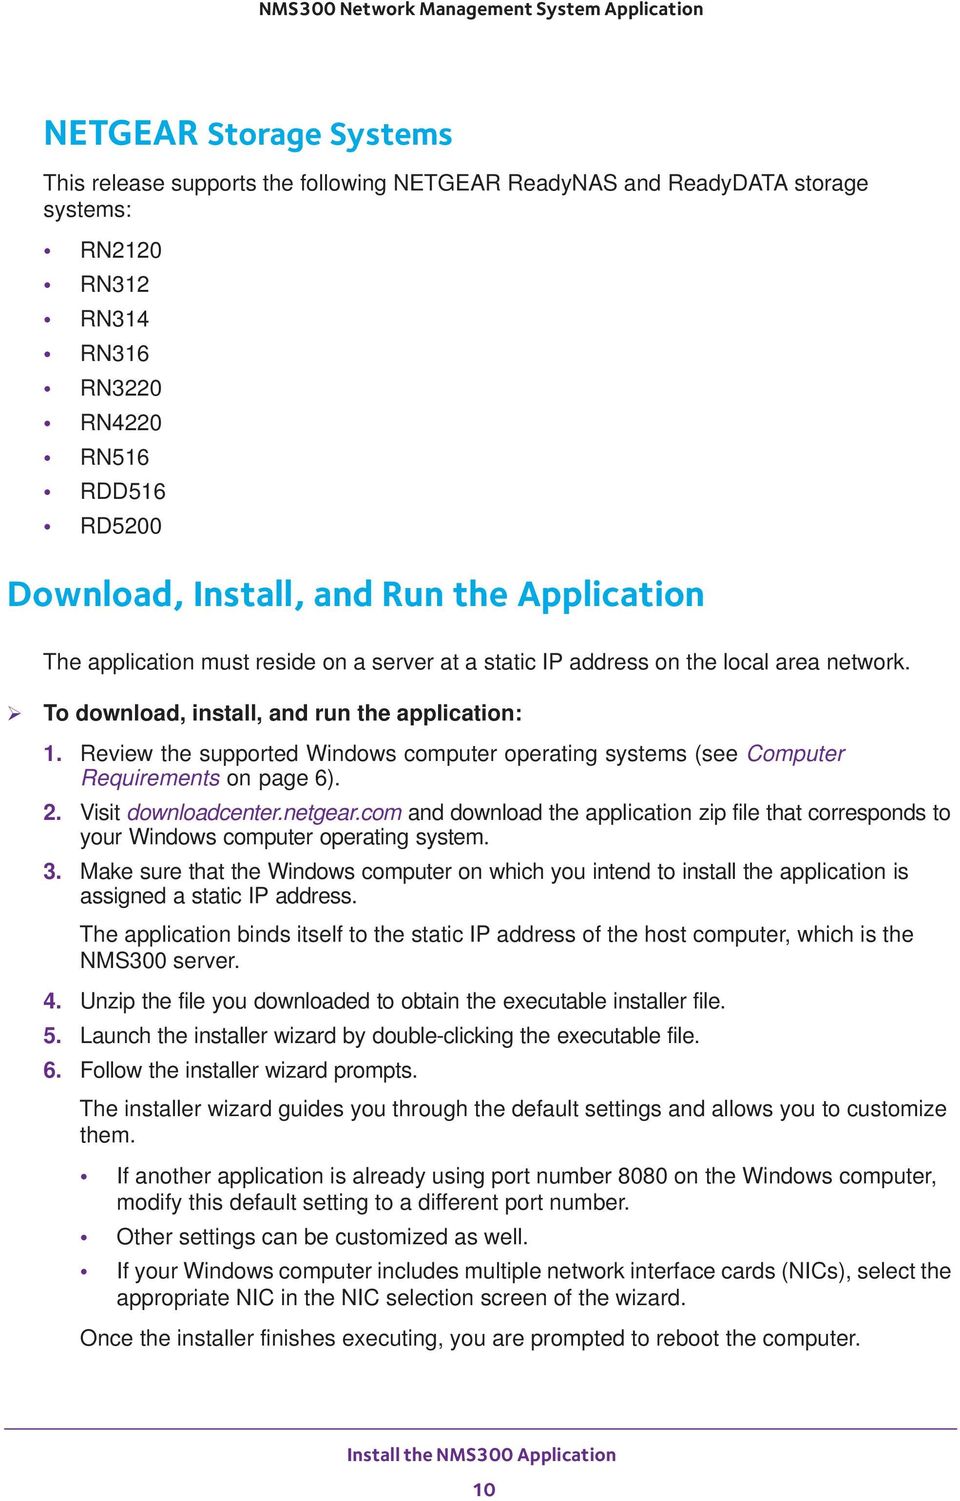 Review the supported Windows computer operating systems (see Computer Requirements on page 6). 2. Visit downloadcenter.netgear.